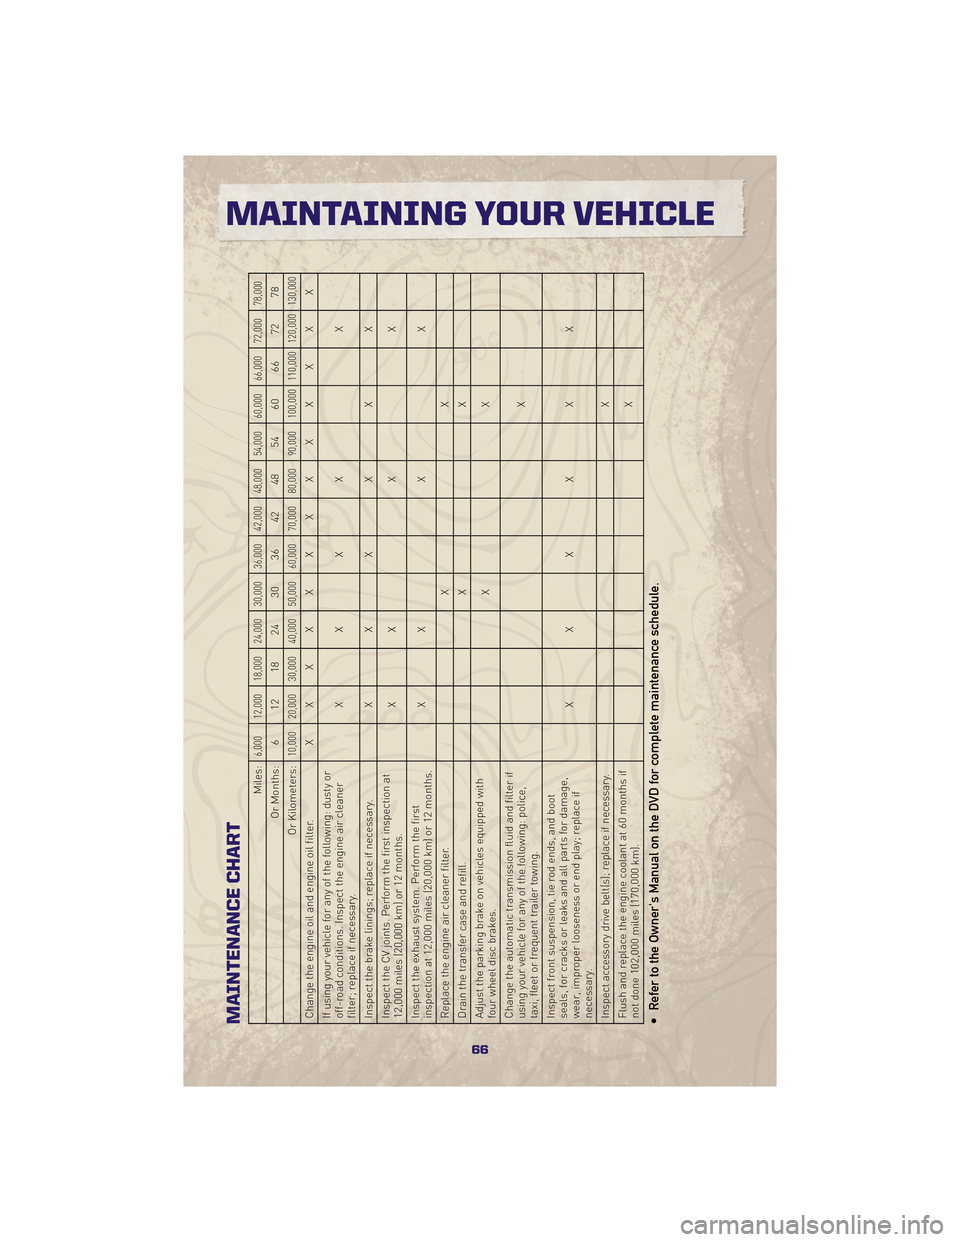 JEEP GRAND CHEROKEE 2010 WK / 3.G User Guide MAINTENANCE CHART
Miles:
6,000 12,000 18,000 24,000 30,000 36,000 42,000 48,000 54,000 60,000 66,000 72,000 78,000
Or Months: 6 12 18 24 30 36 42 48 54 60 66 72 78
Or Kilometers:
10,000 20,000 30,000 